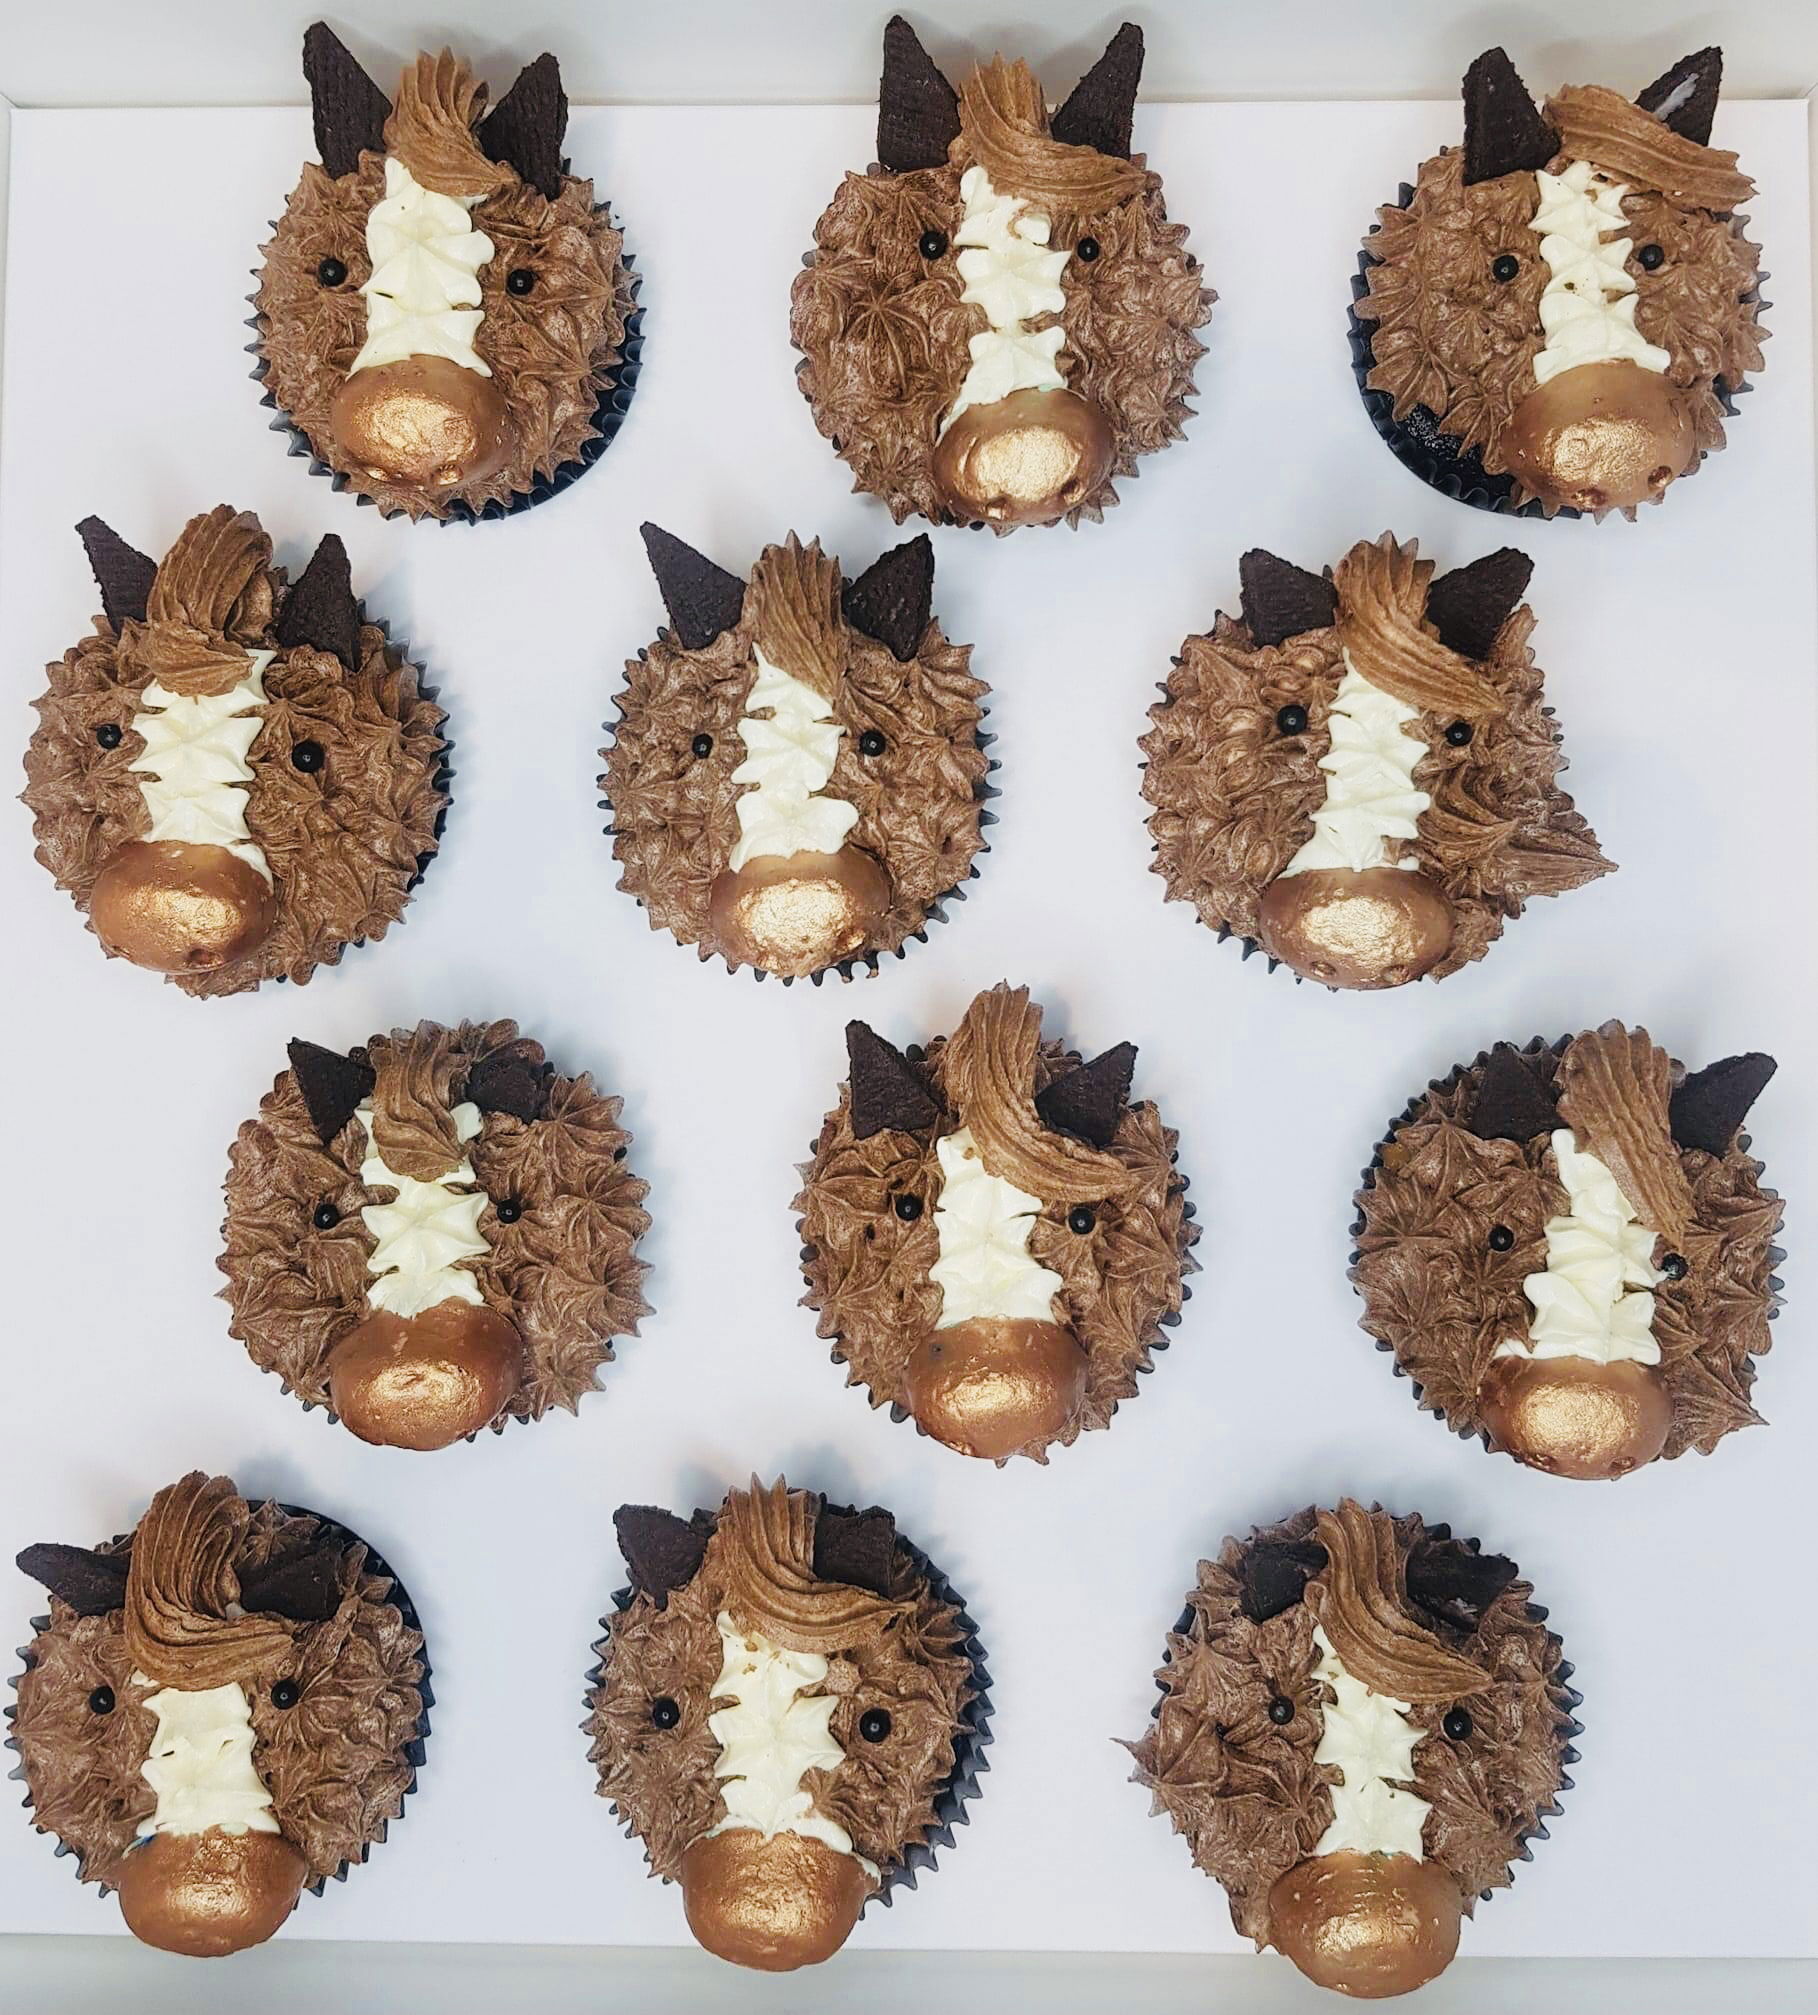 Chocolate Horse Cupcakes With Buttercream Frosting